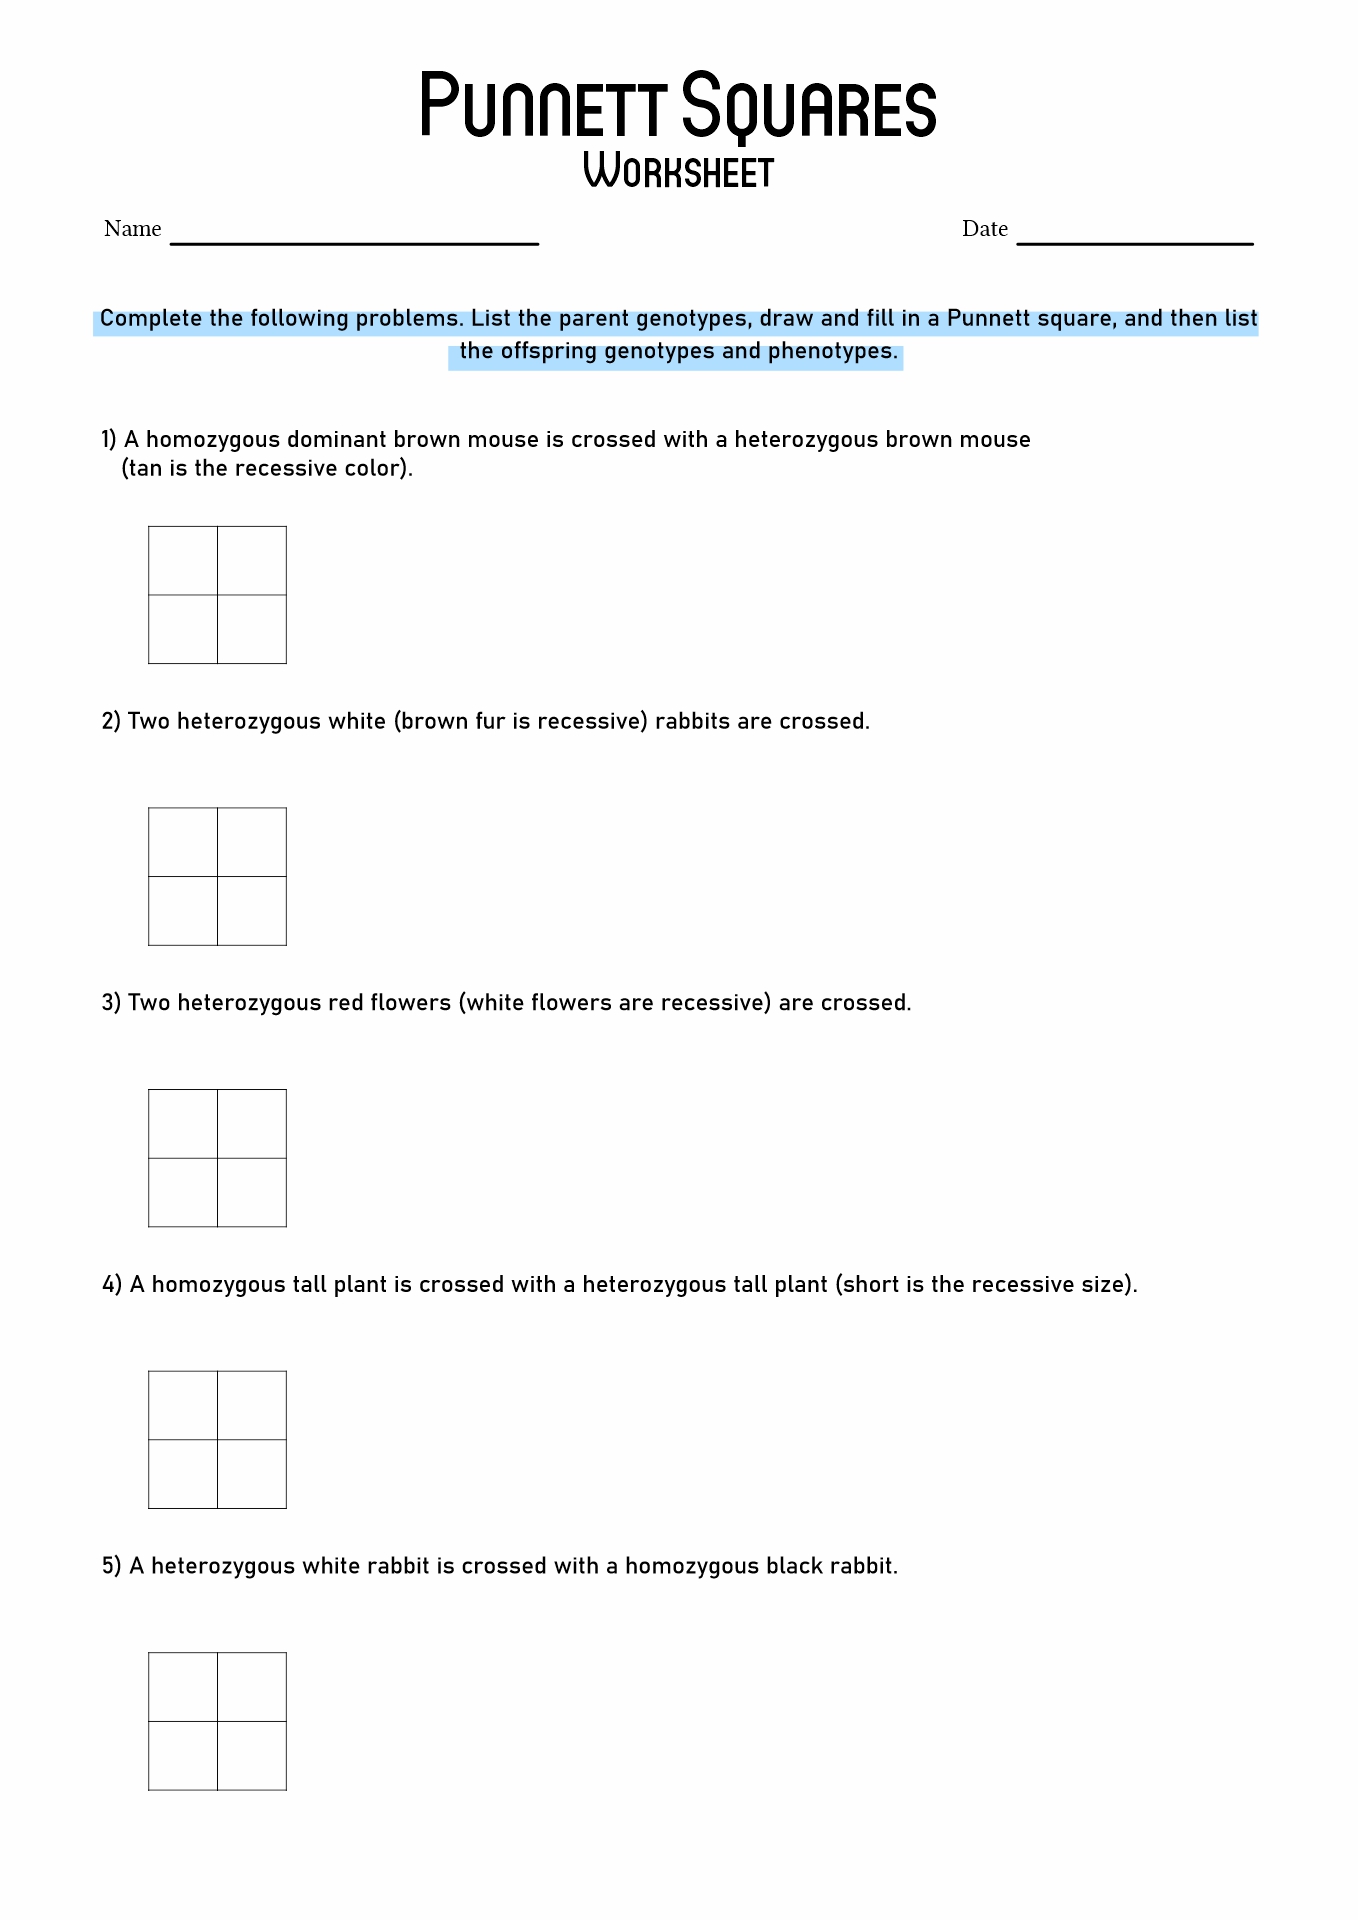 punnett-squares-worksheet-with-answers